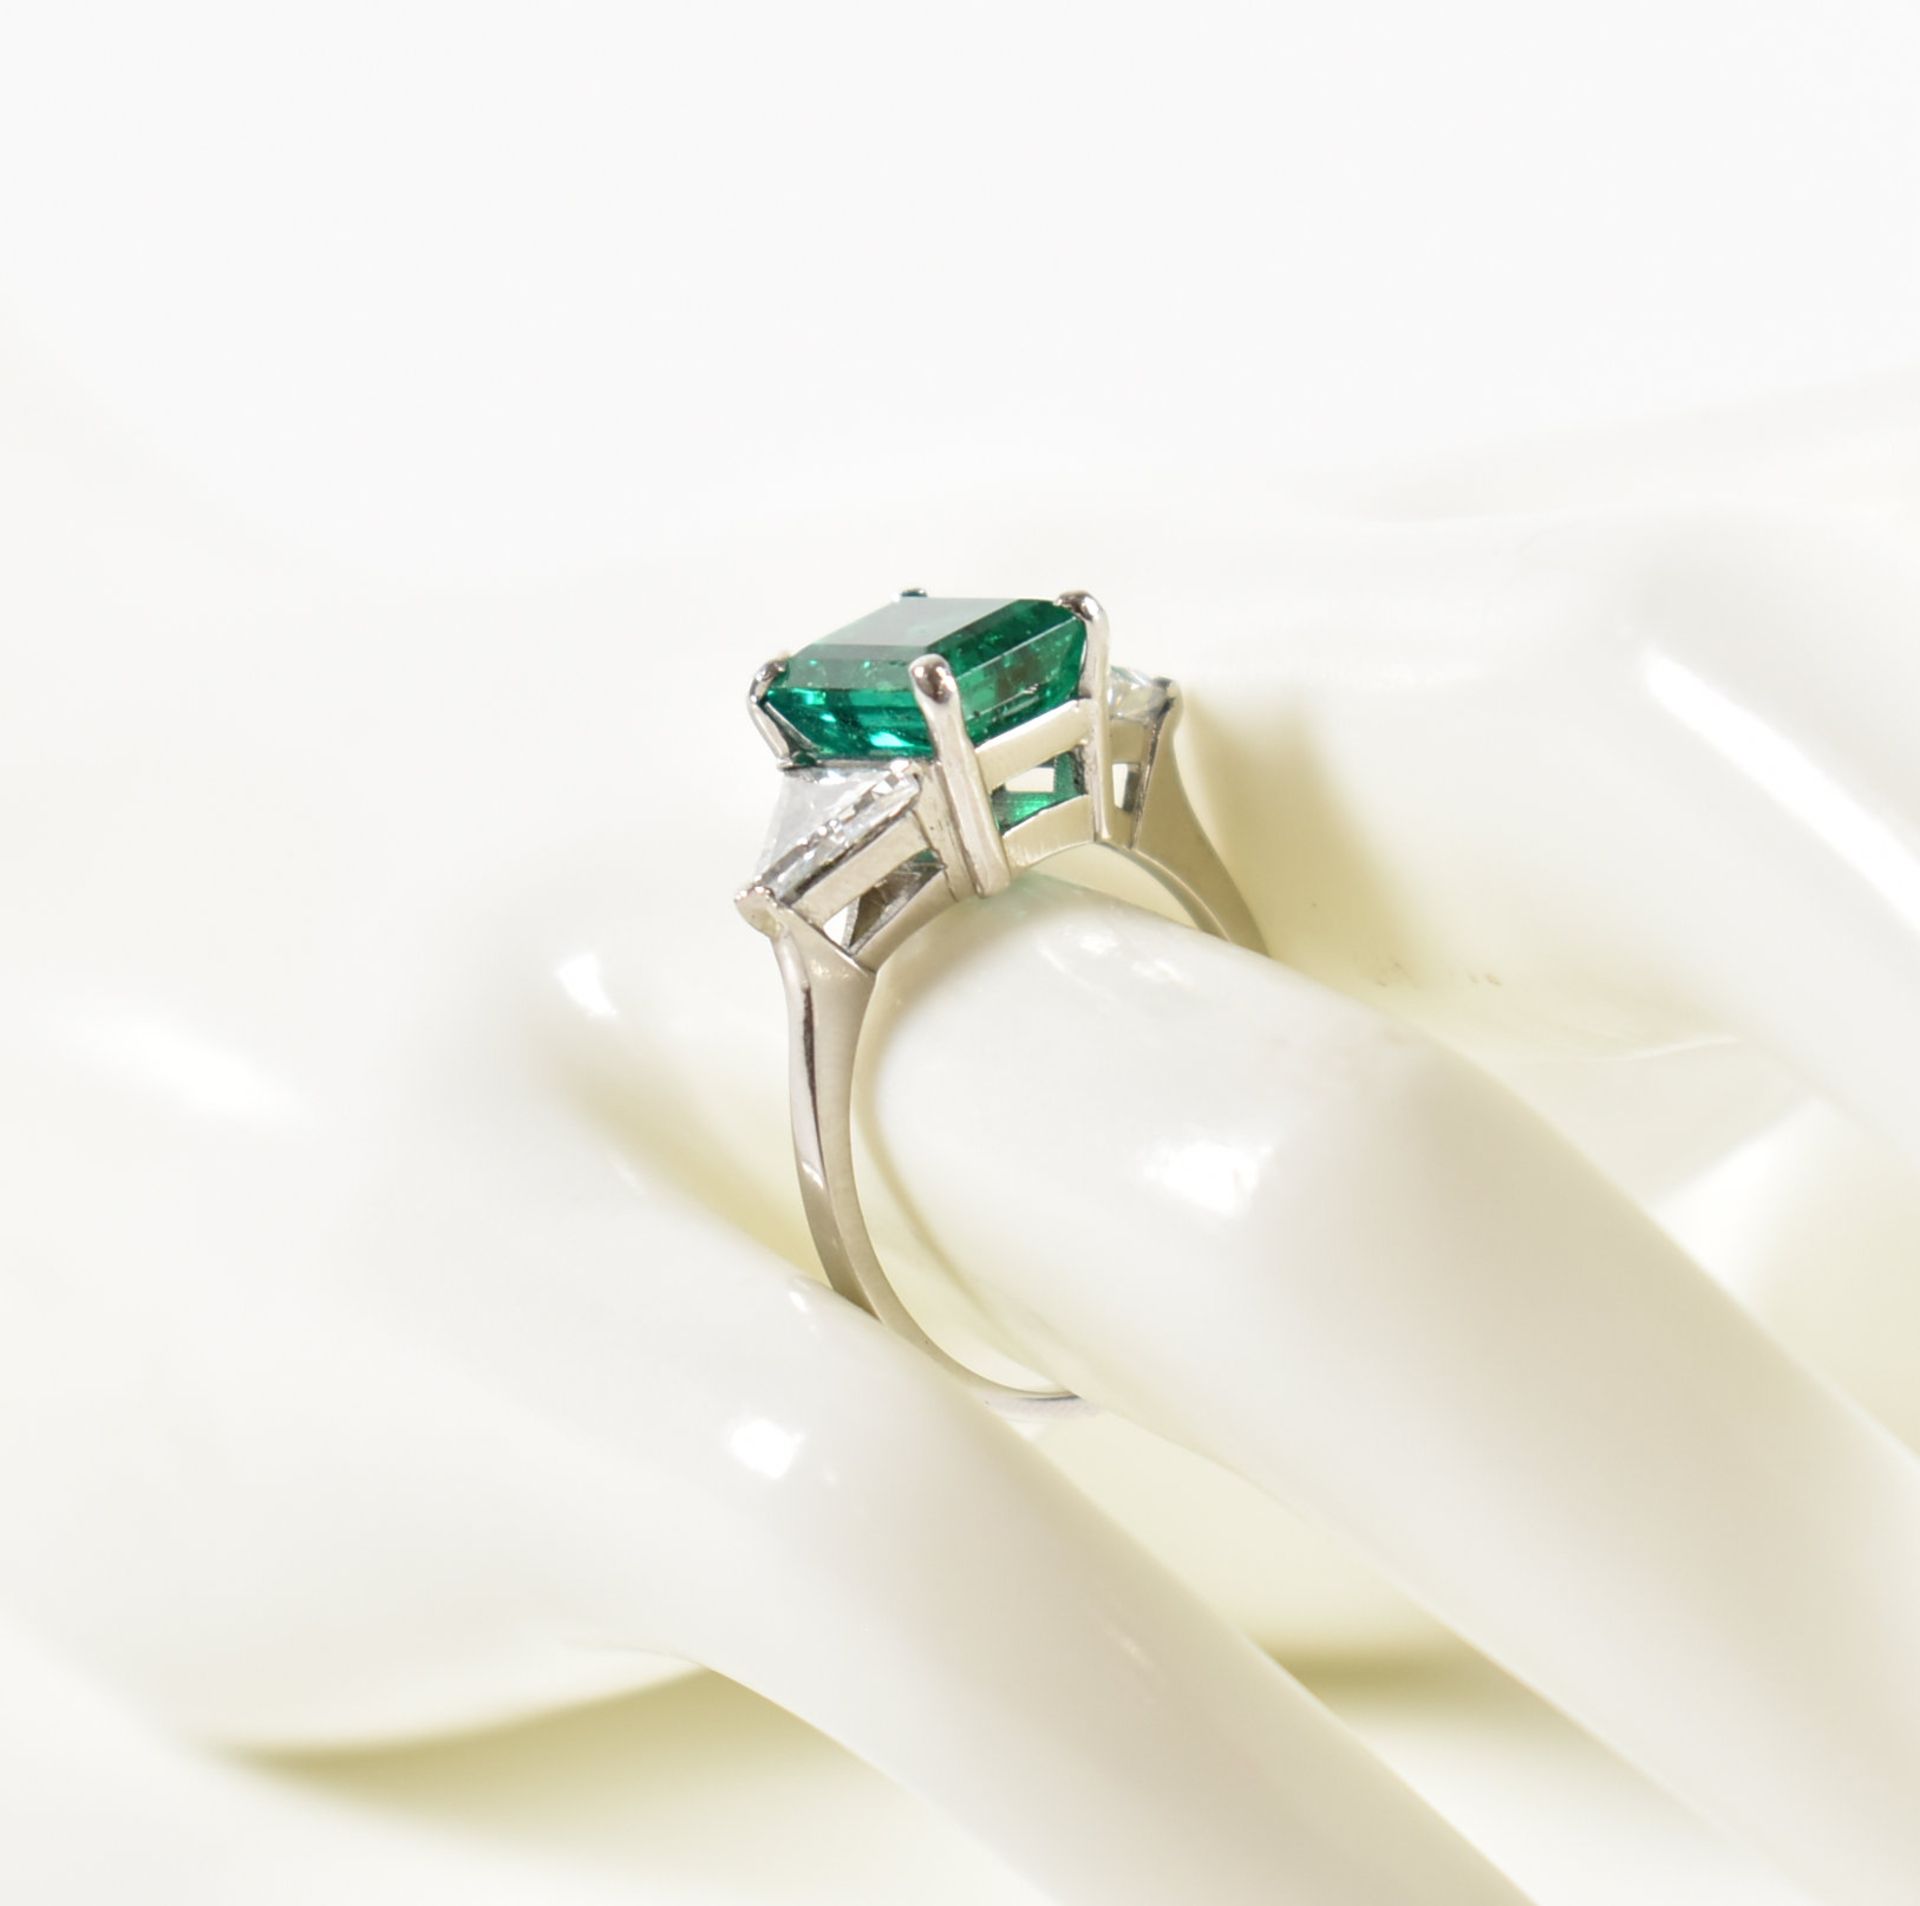 18CT WHITE GOLD COLOMBIAN EMERALD & DIAMOND RING - Image 11 of 19